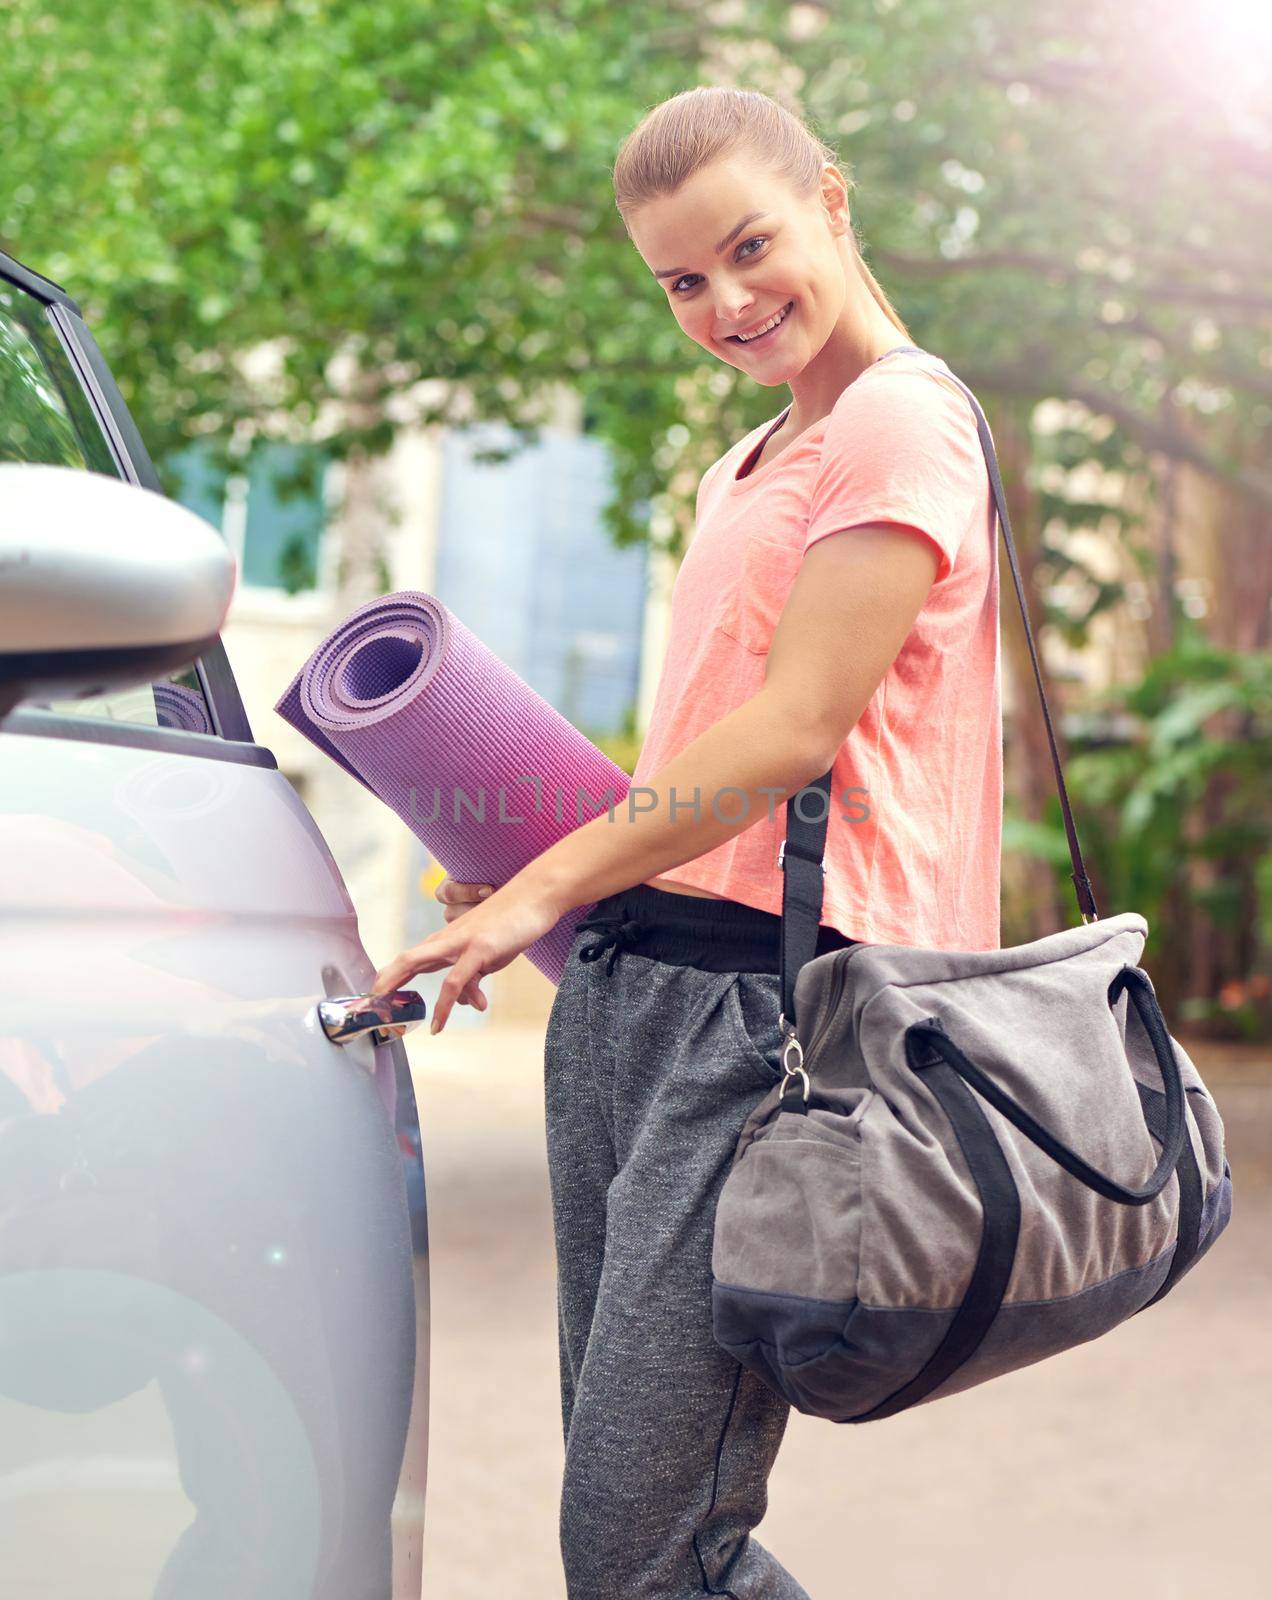 Yoga keeps me healthy and happy. a beautiful young woman carrying a yoga mat while getting into her car. by YuriArcurs